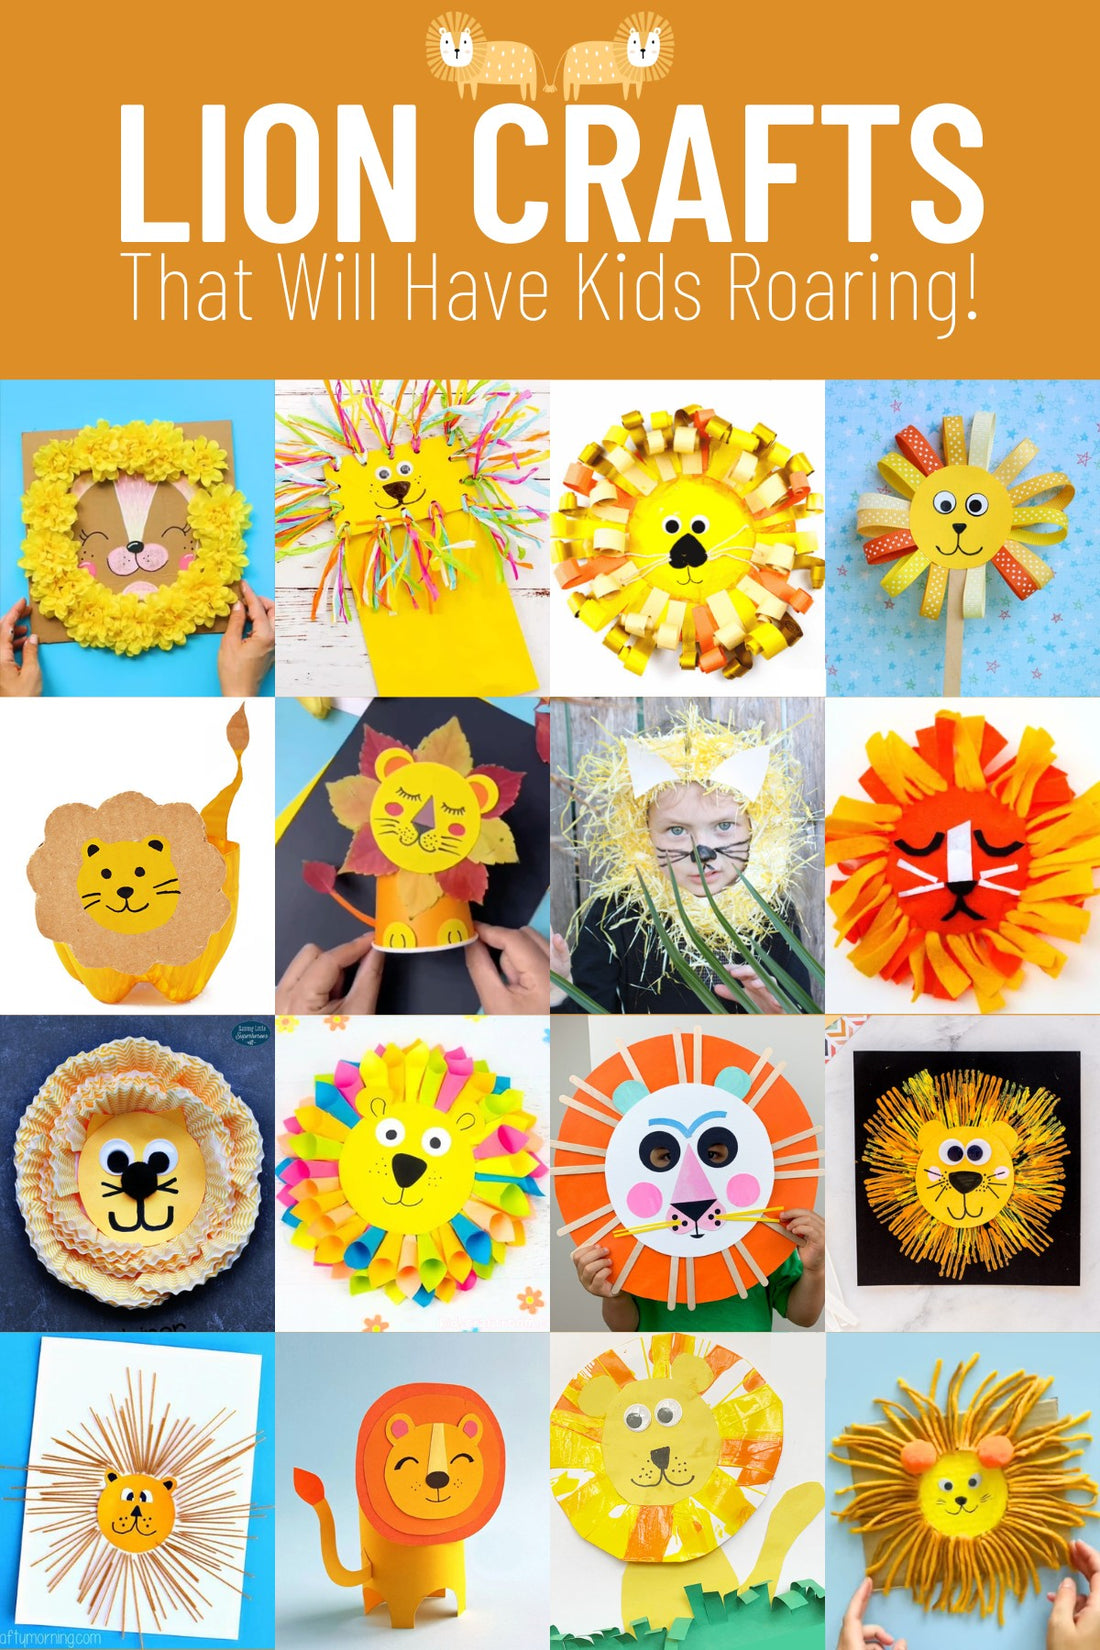 Lion Crafts That Will Have Kids Roaring With Excitement!